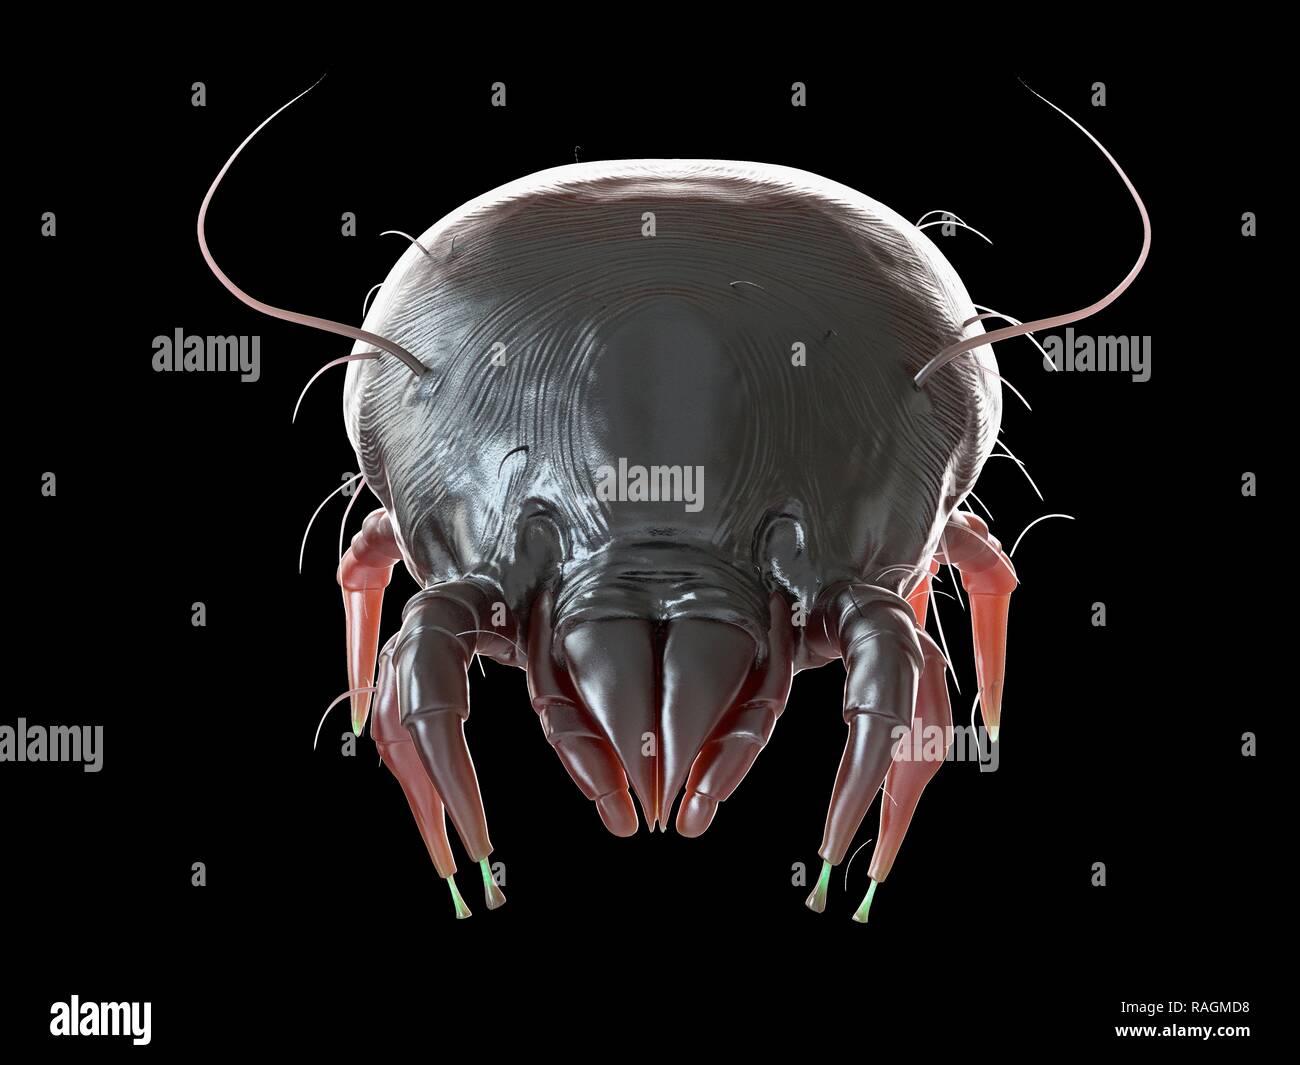 Illustration of a dust mite. Stock Photo